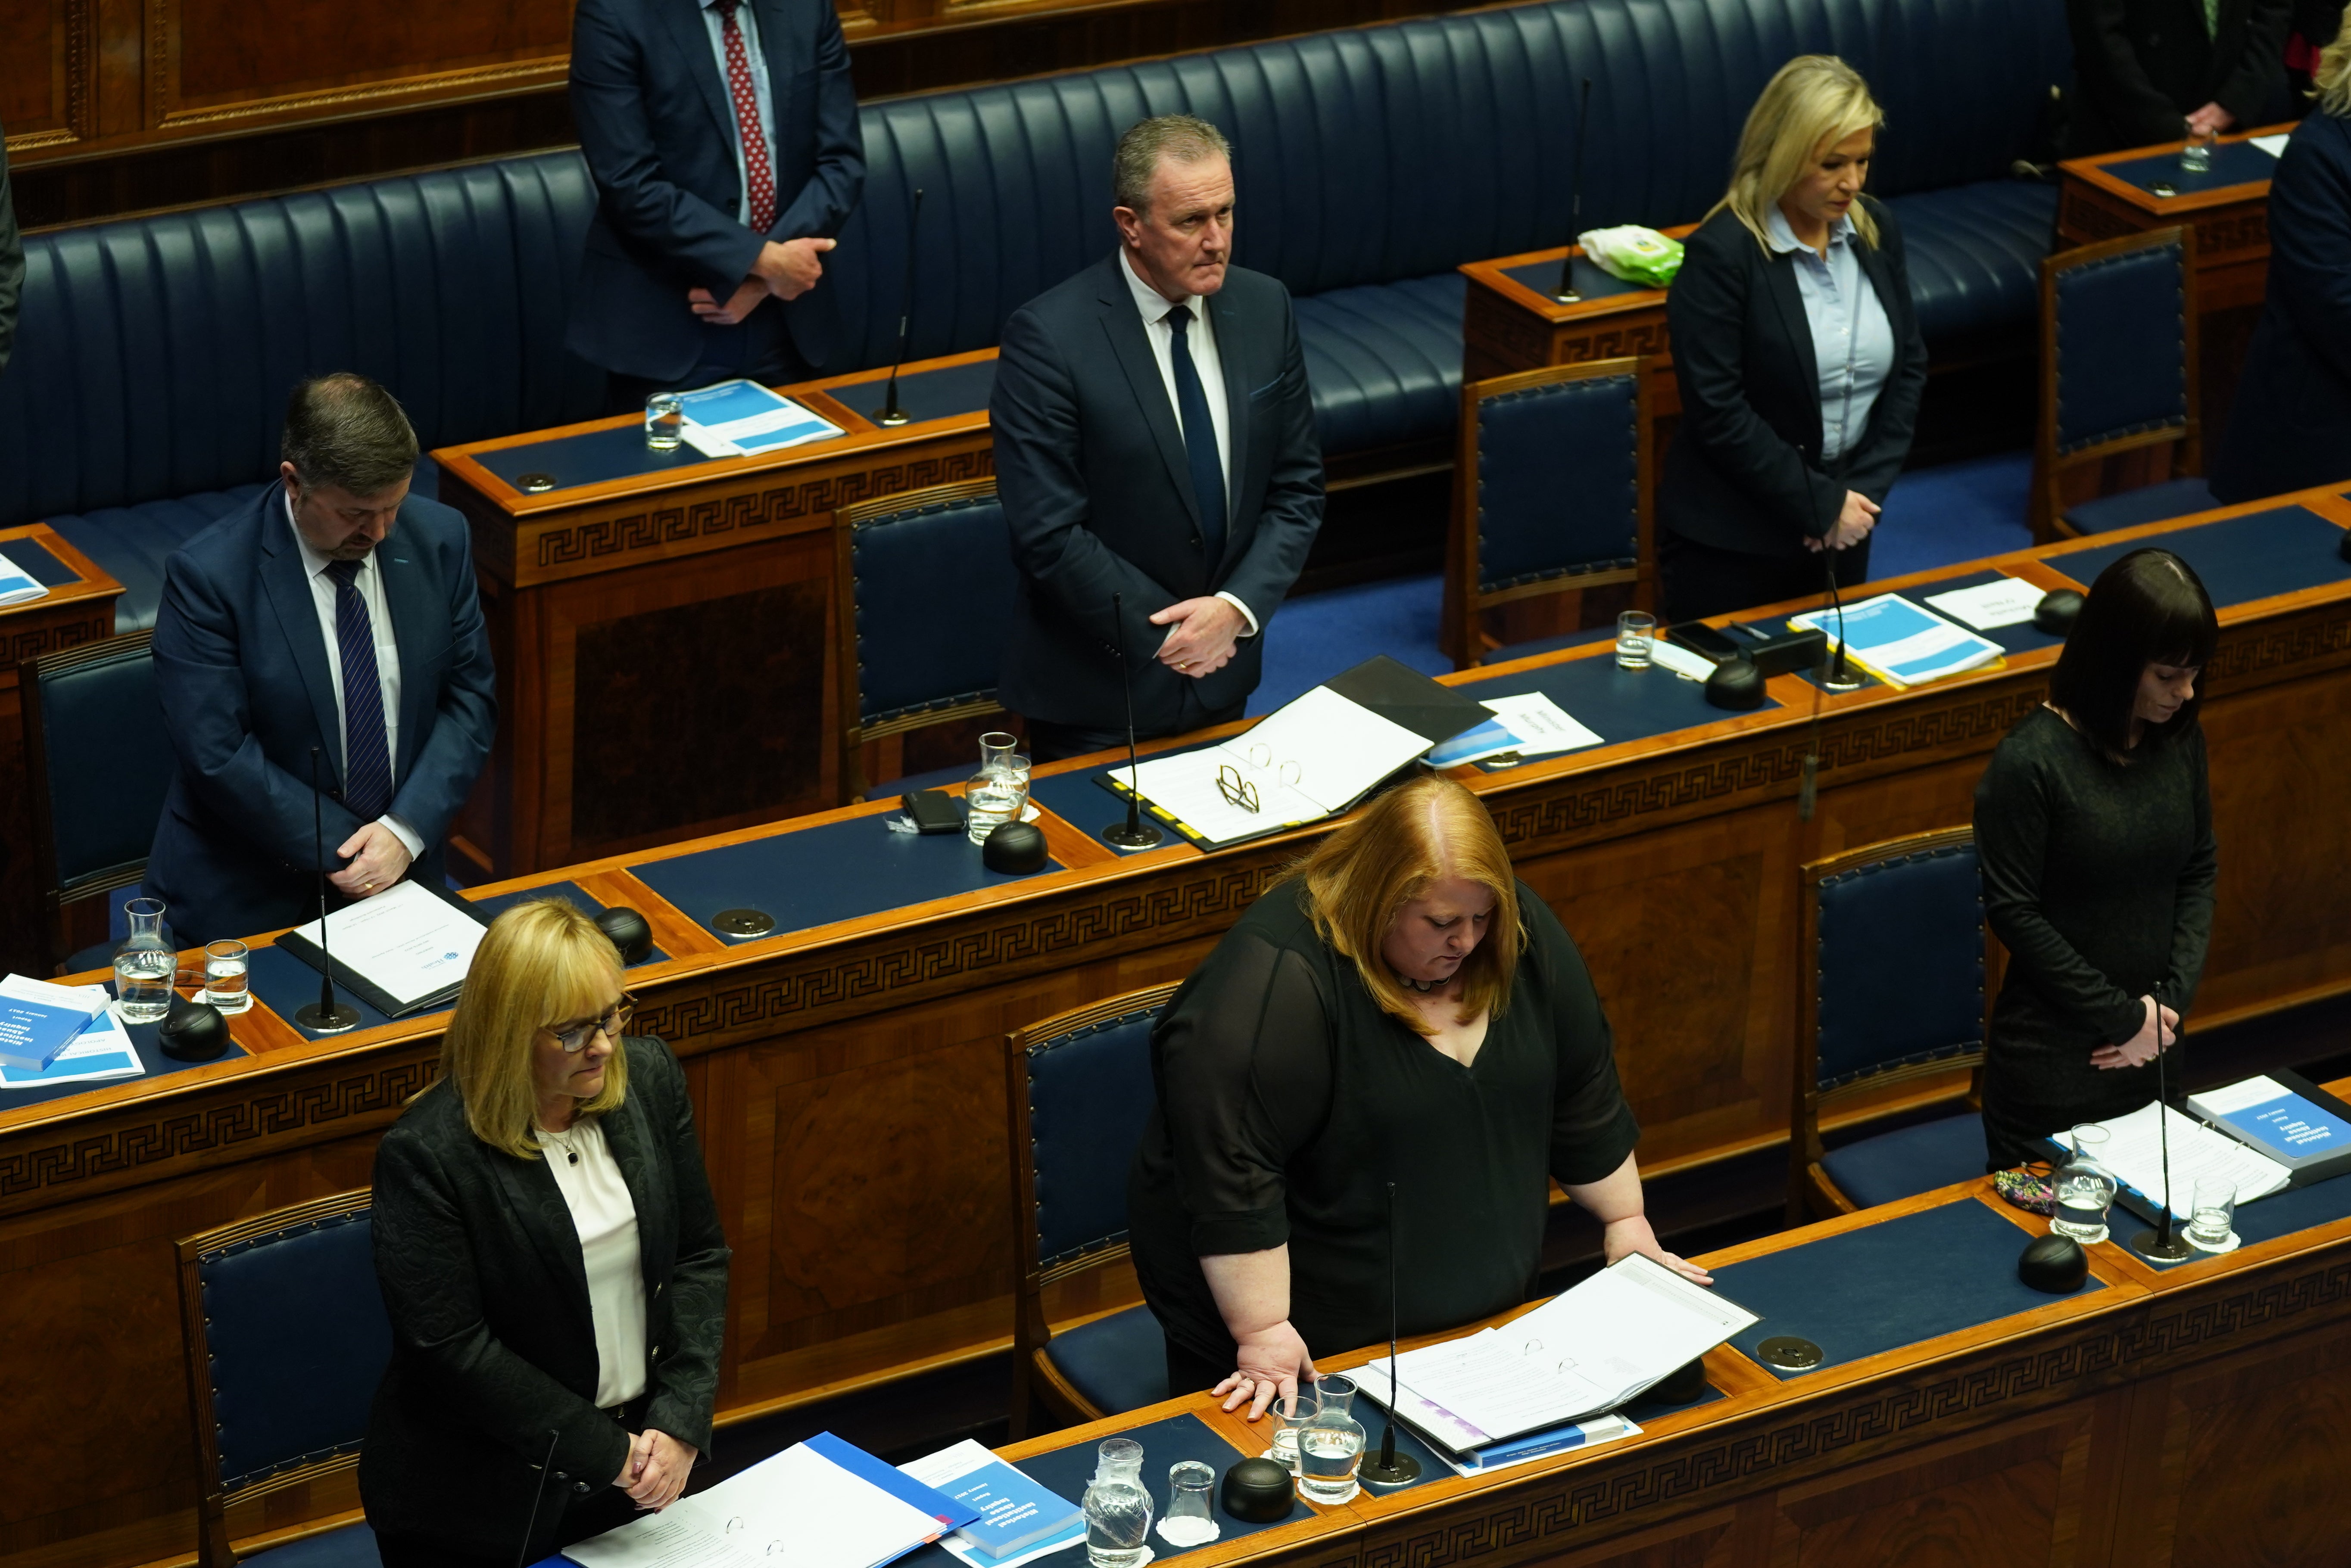 Ministers take part in minute’s silence ahead in the Northern Ireland Assembly chamber at Stormont before the delivery of the long-awaited public apology to the victims of historical institutional abuse. (Brian Lawless/PA)